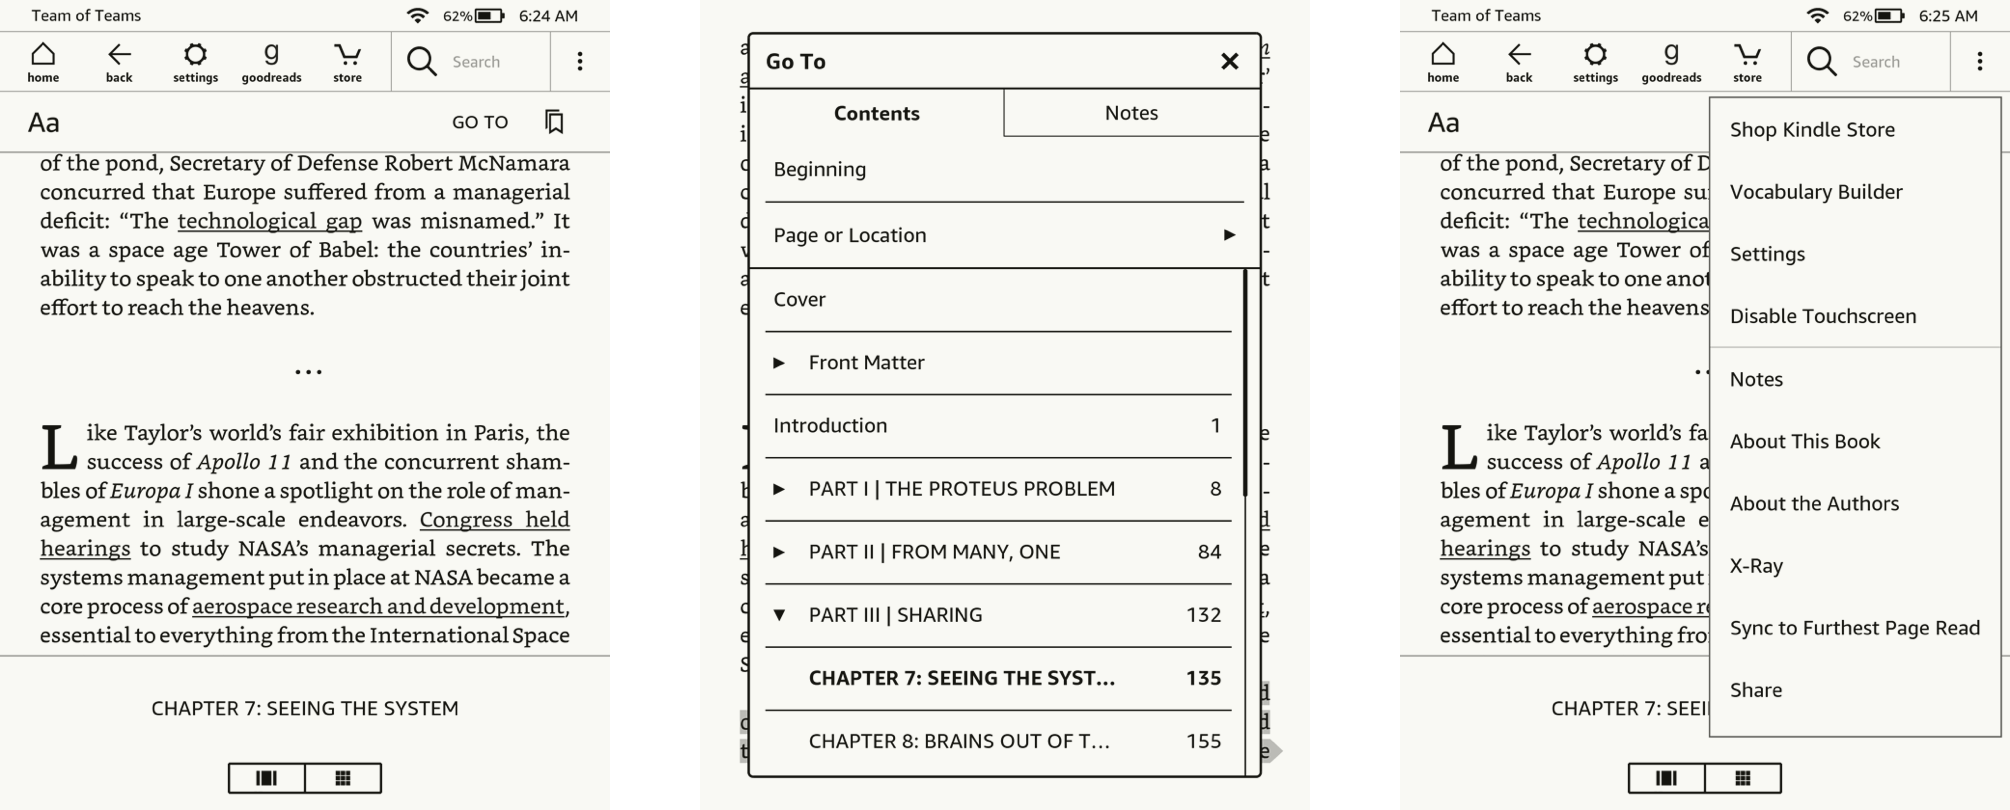 Navigation menus within a book in a dedicated Kindle device. The middle screenshot shows the contents of the "Go To" menu. The one on the right shows the generic "vertical ellipsis" menu.